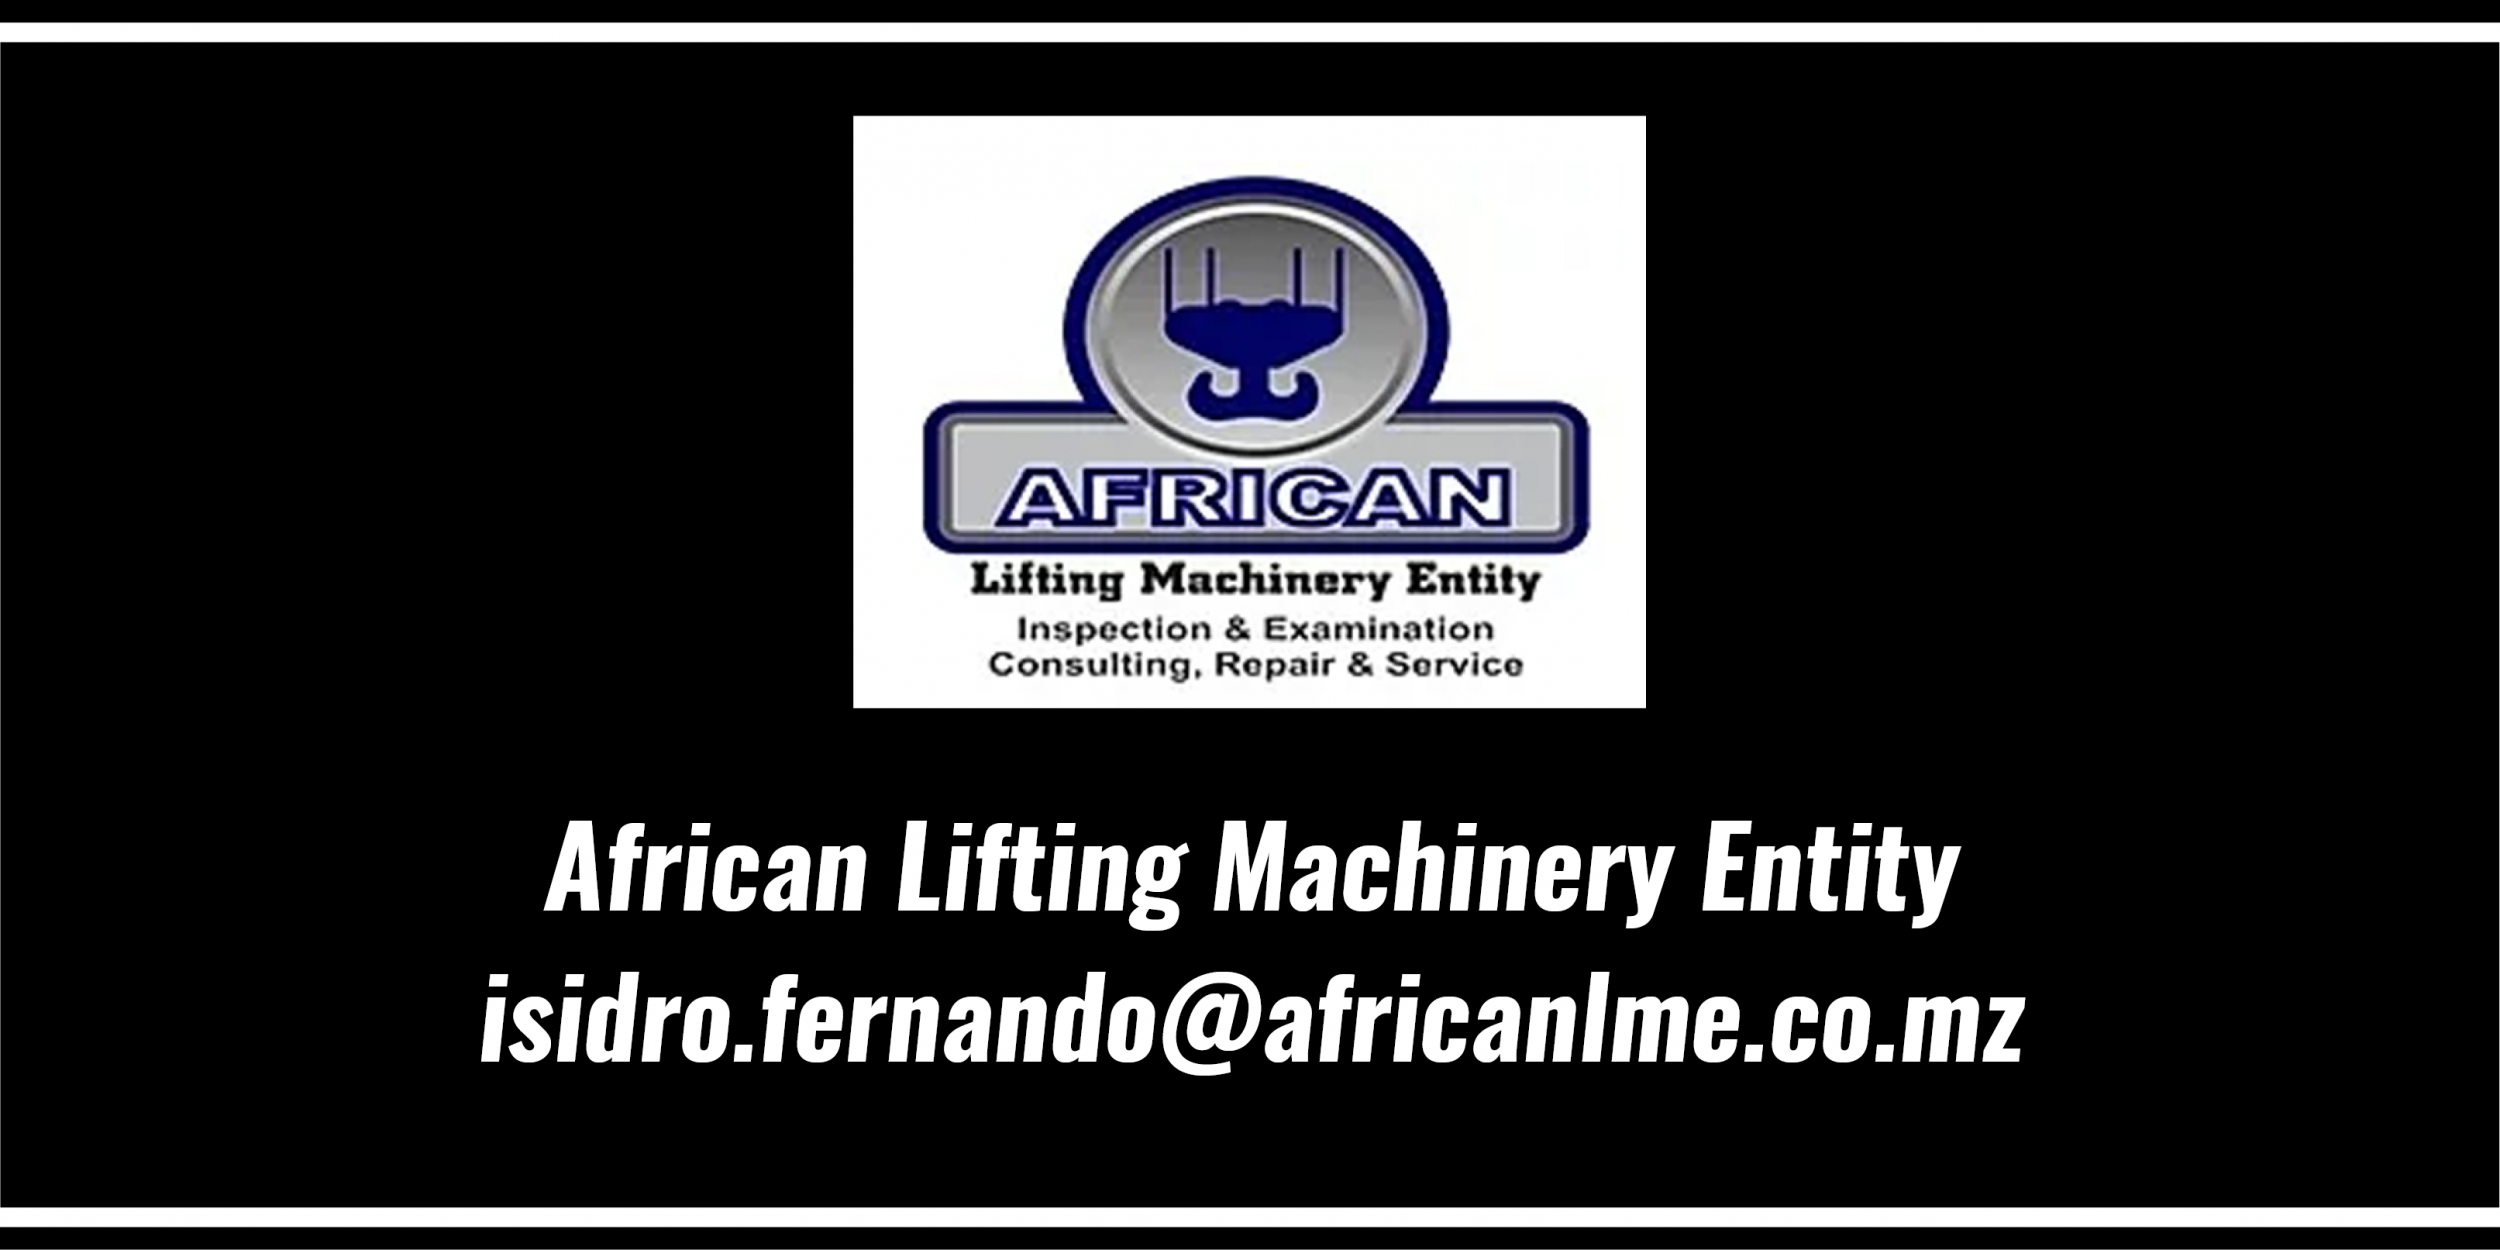 African Lifting Machinery Entity